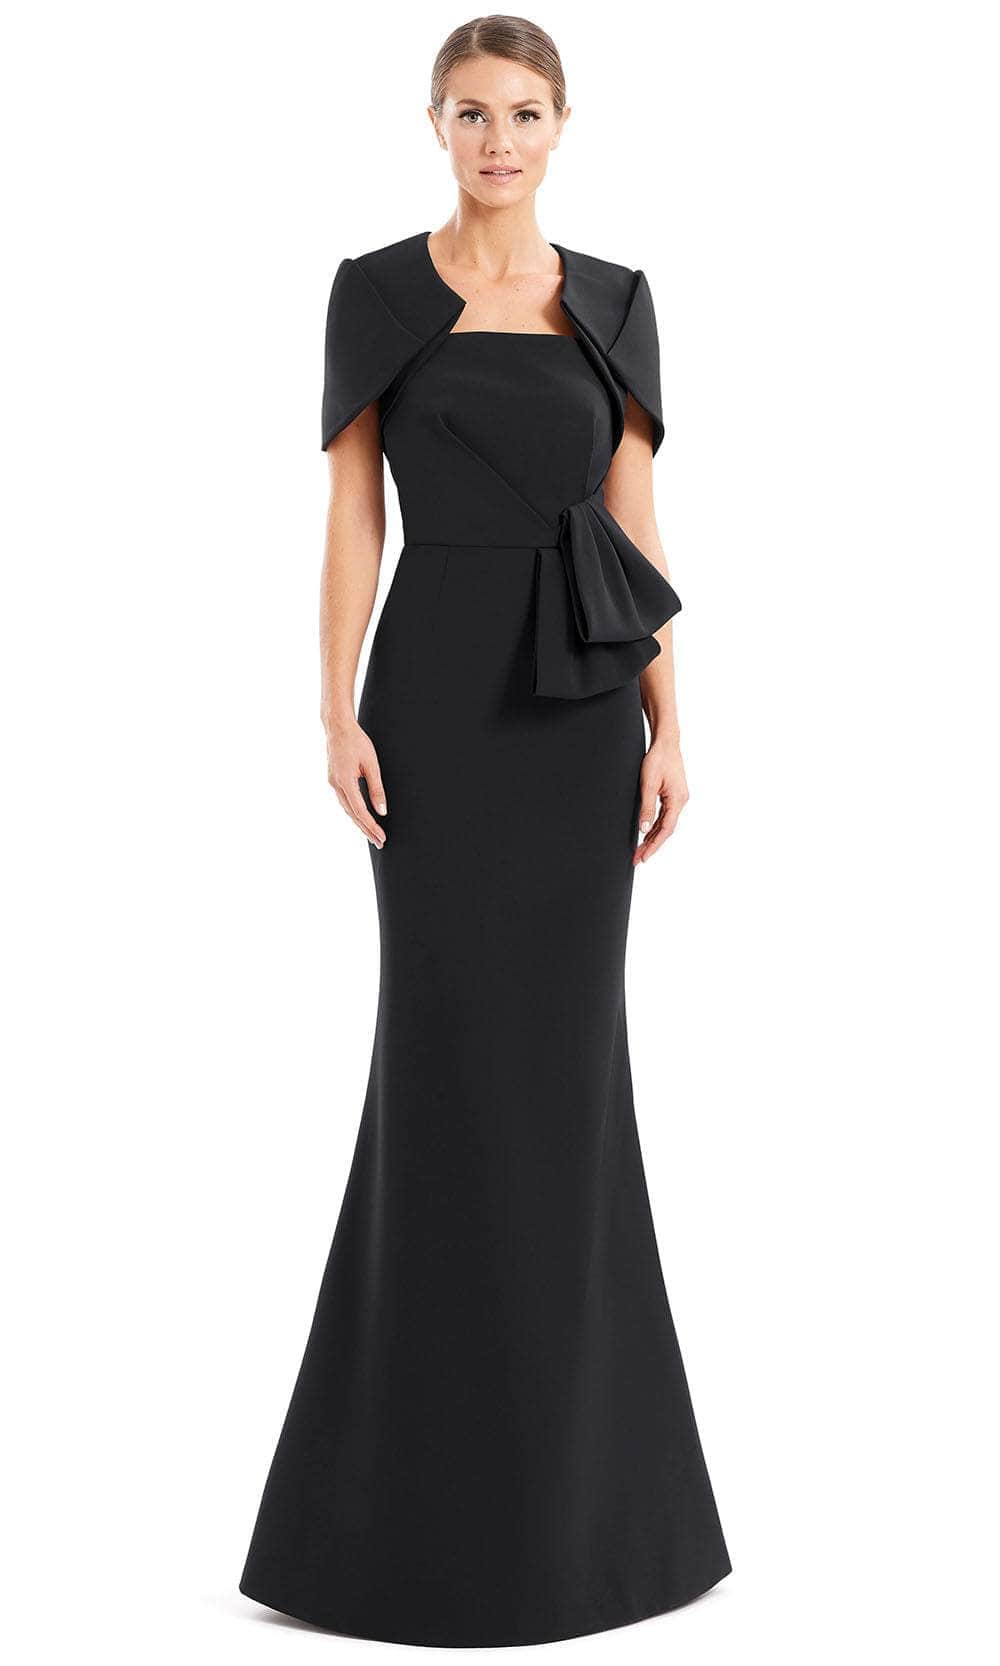 Alexander by Daymor, Alexander by Daymor 1656 - Peplum Detailed Straight-Across Neck Formal Gown With Jacket